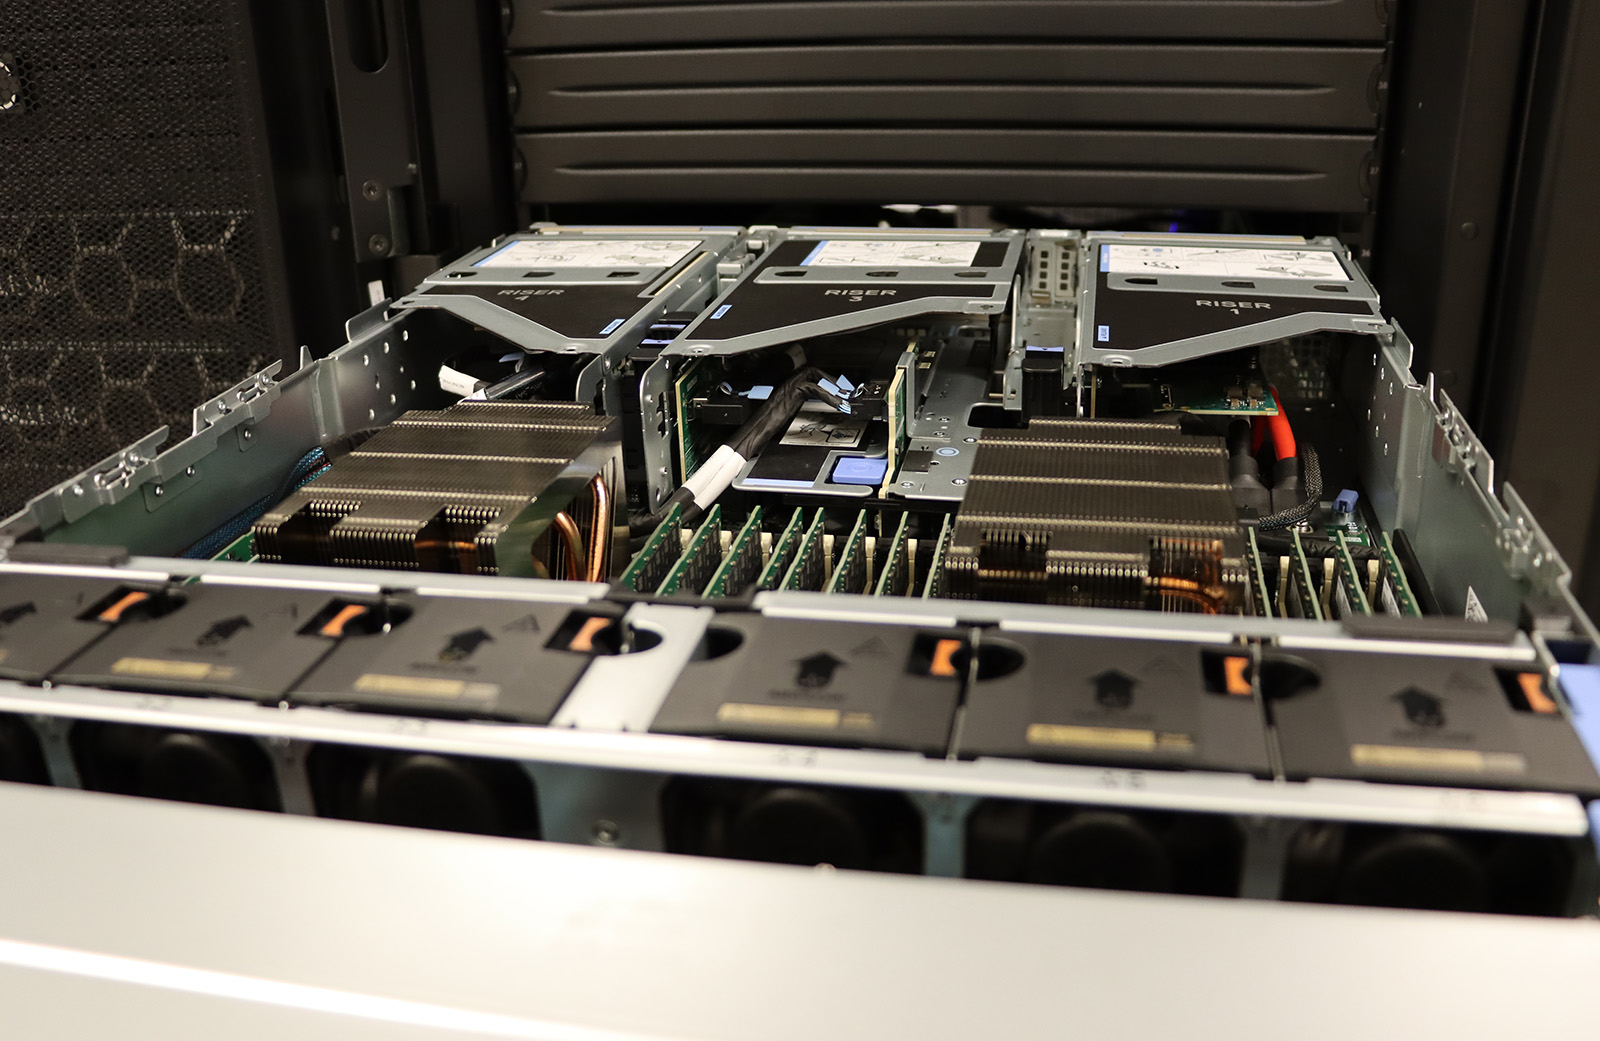 A view inside the test node in OSC's data center in Columbus, Ohio. Visible components include air intake fans, RAM memory modules and heat sinks.